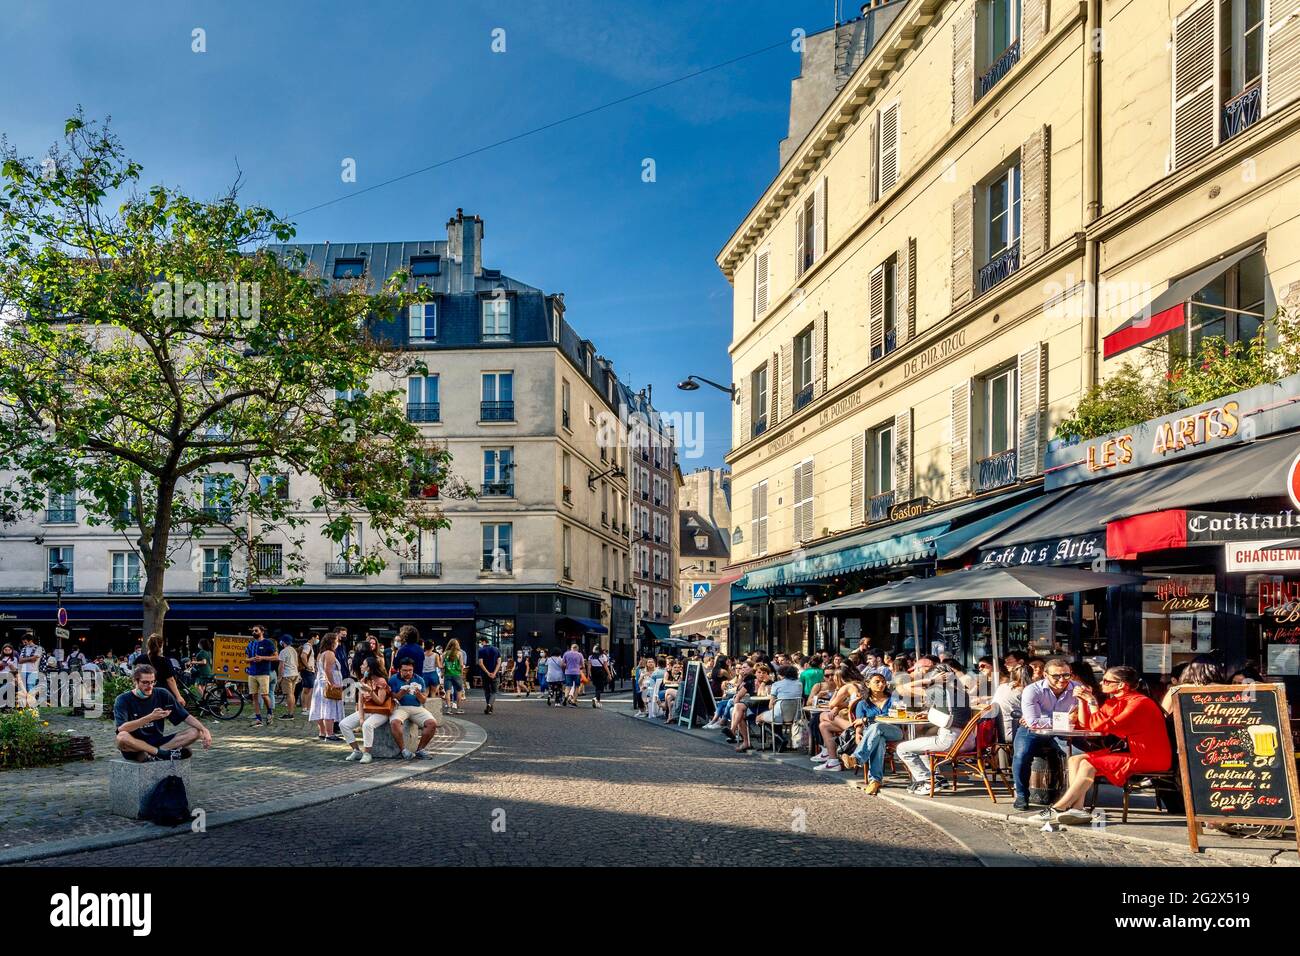 Paris, France - June 12, 2021: After the end of lockdown due to Covid-19 pandemic, people go out again at the restaurant Stock Photo